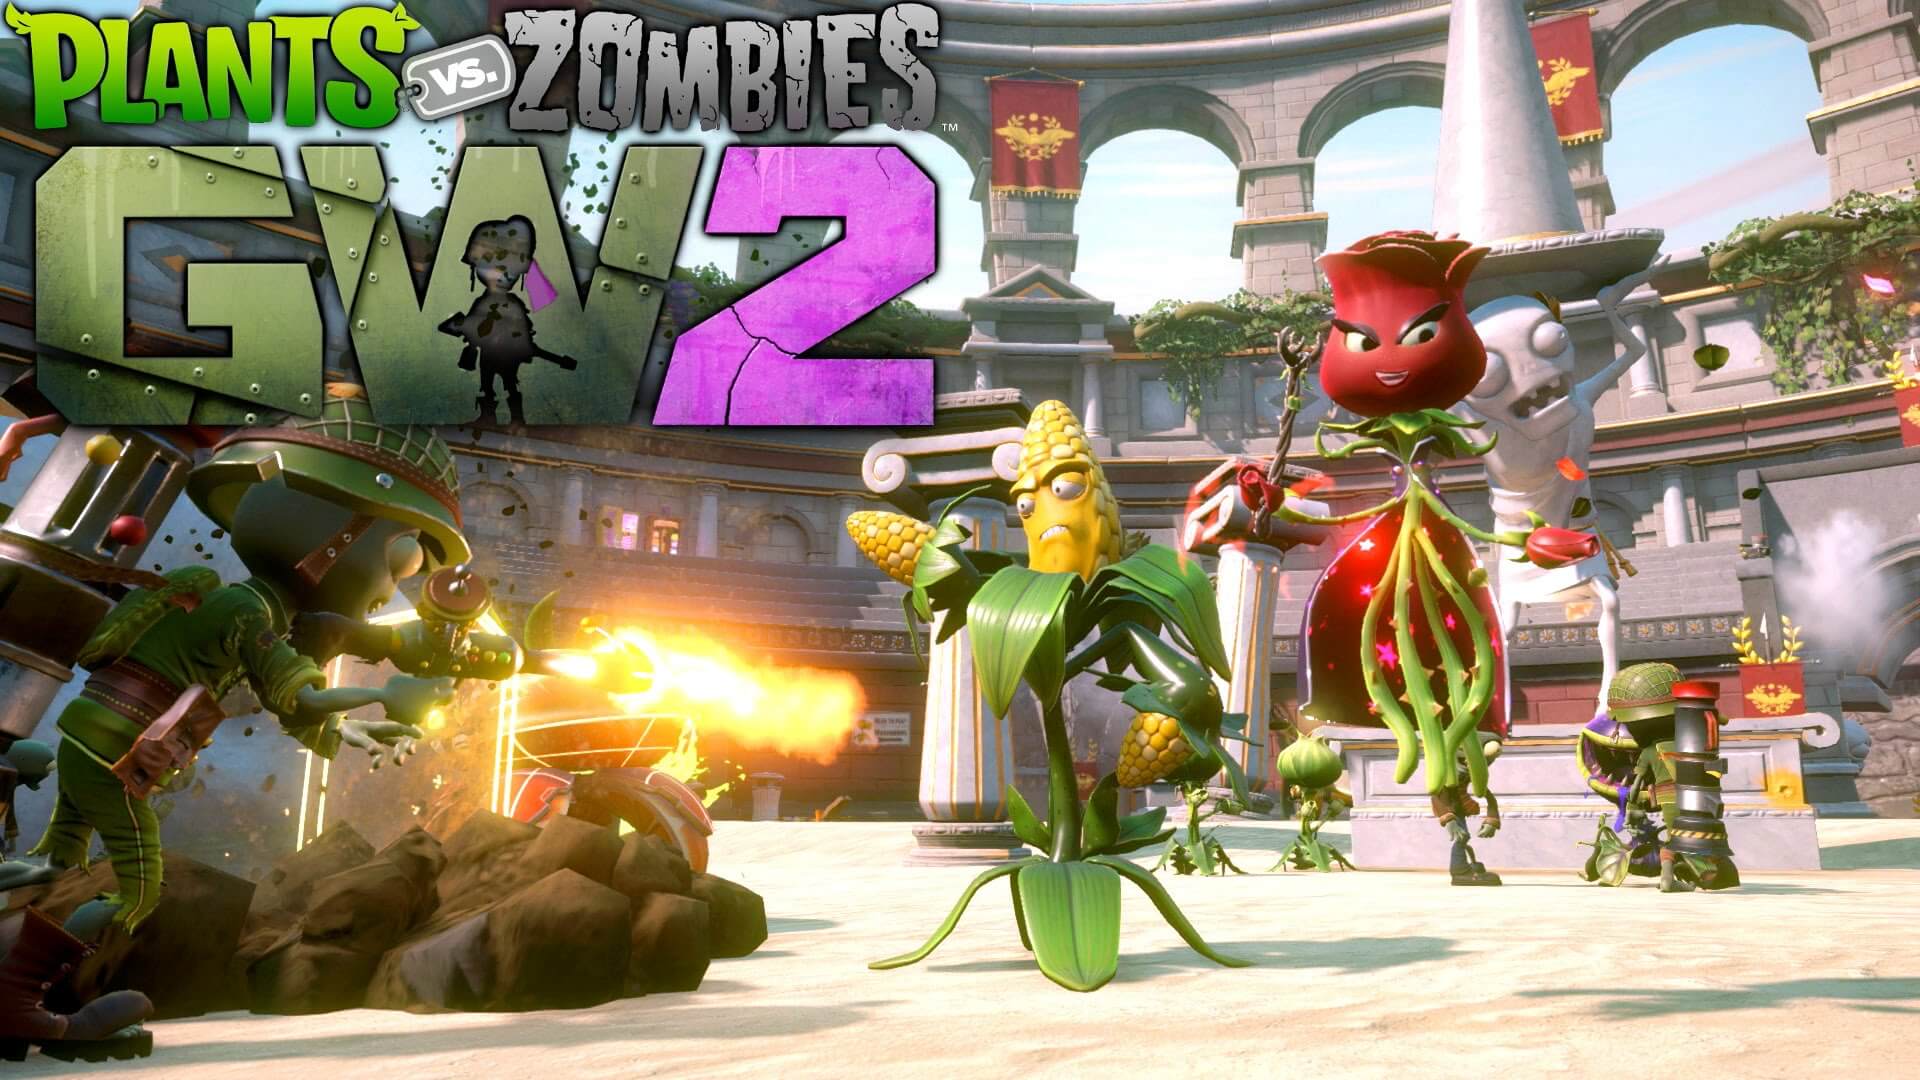 Download Game Plants Vs Zombies 2 For Pc Windows 8